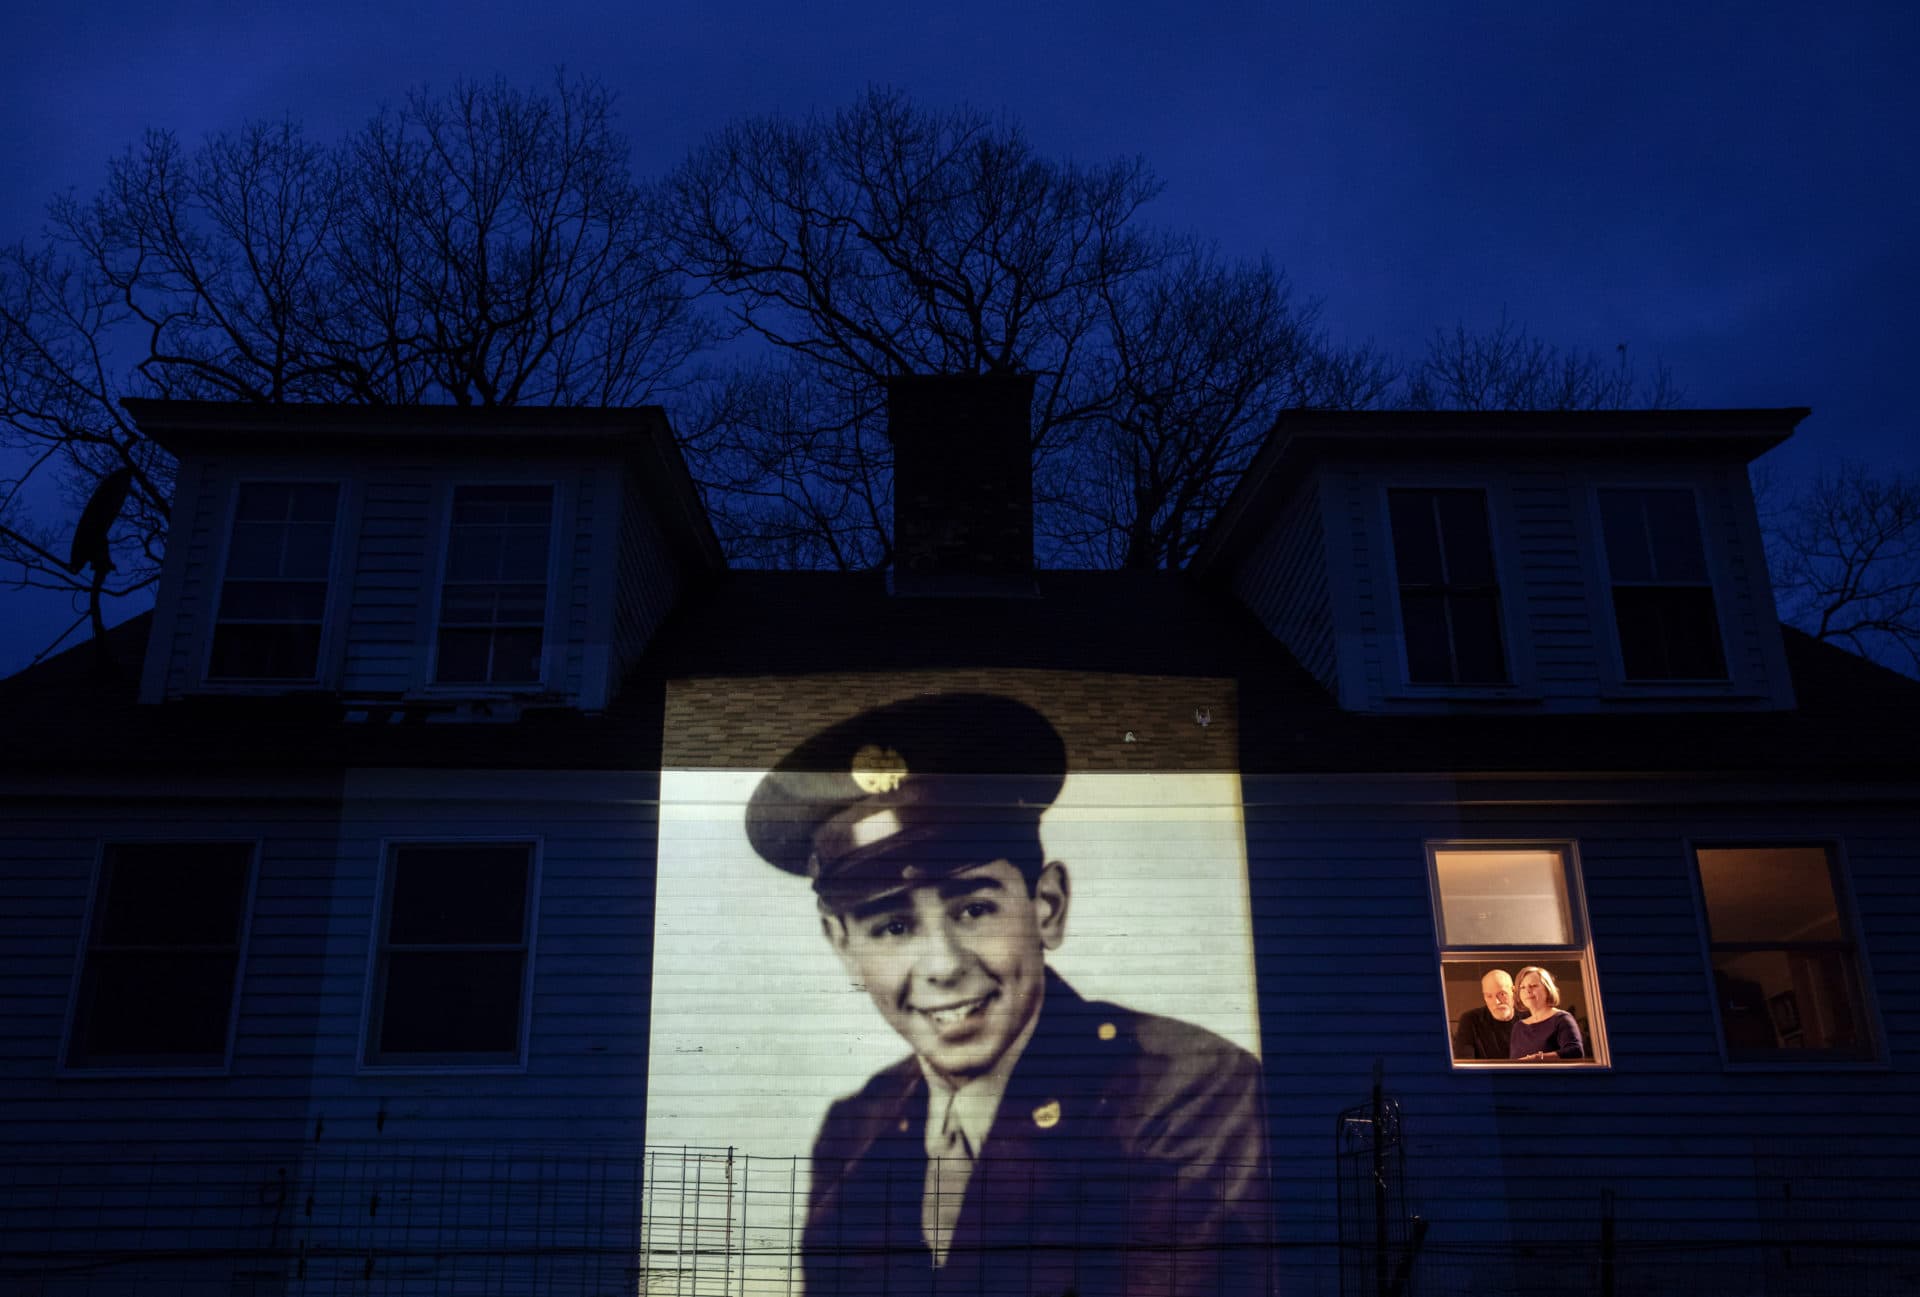 An image of veteran Emilio DiPalma, is projected onto the home of his daughter, Emily Aho, left, as she looks out a window with her husband, George, in Jaffrey, N.H. (David Goldman/AP)